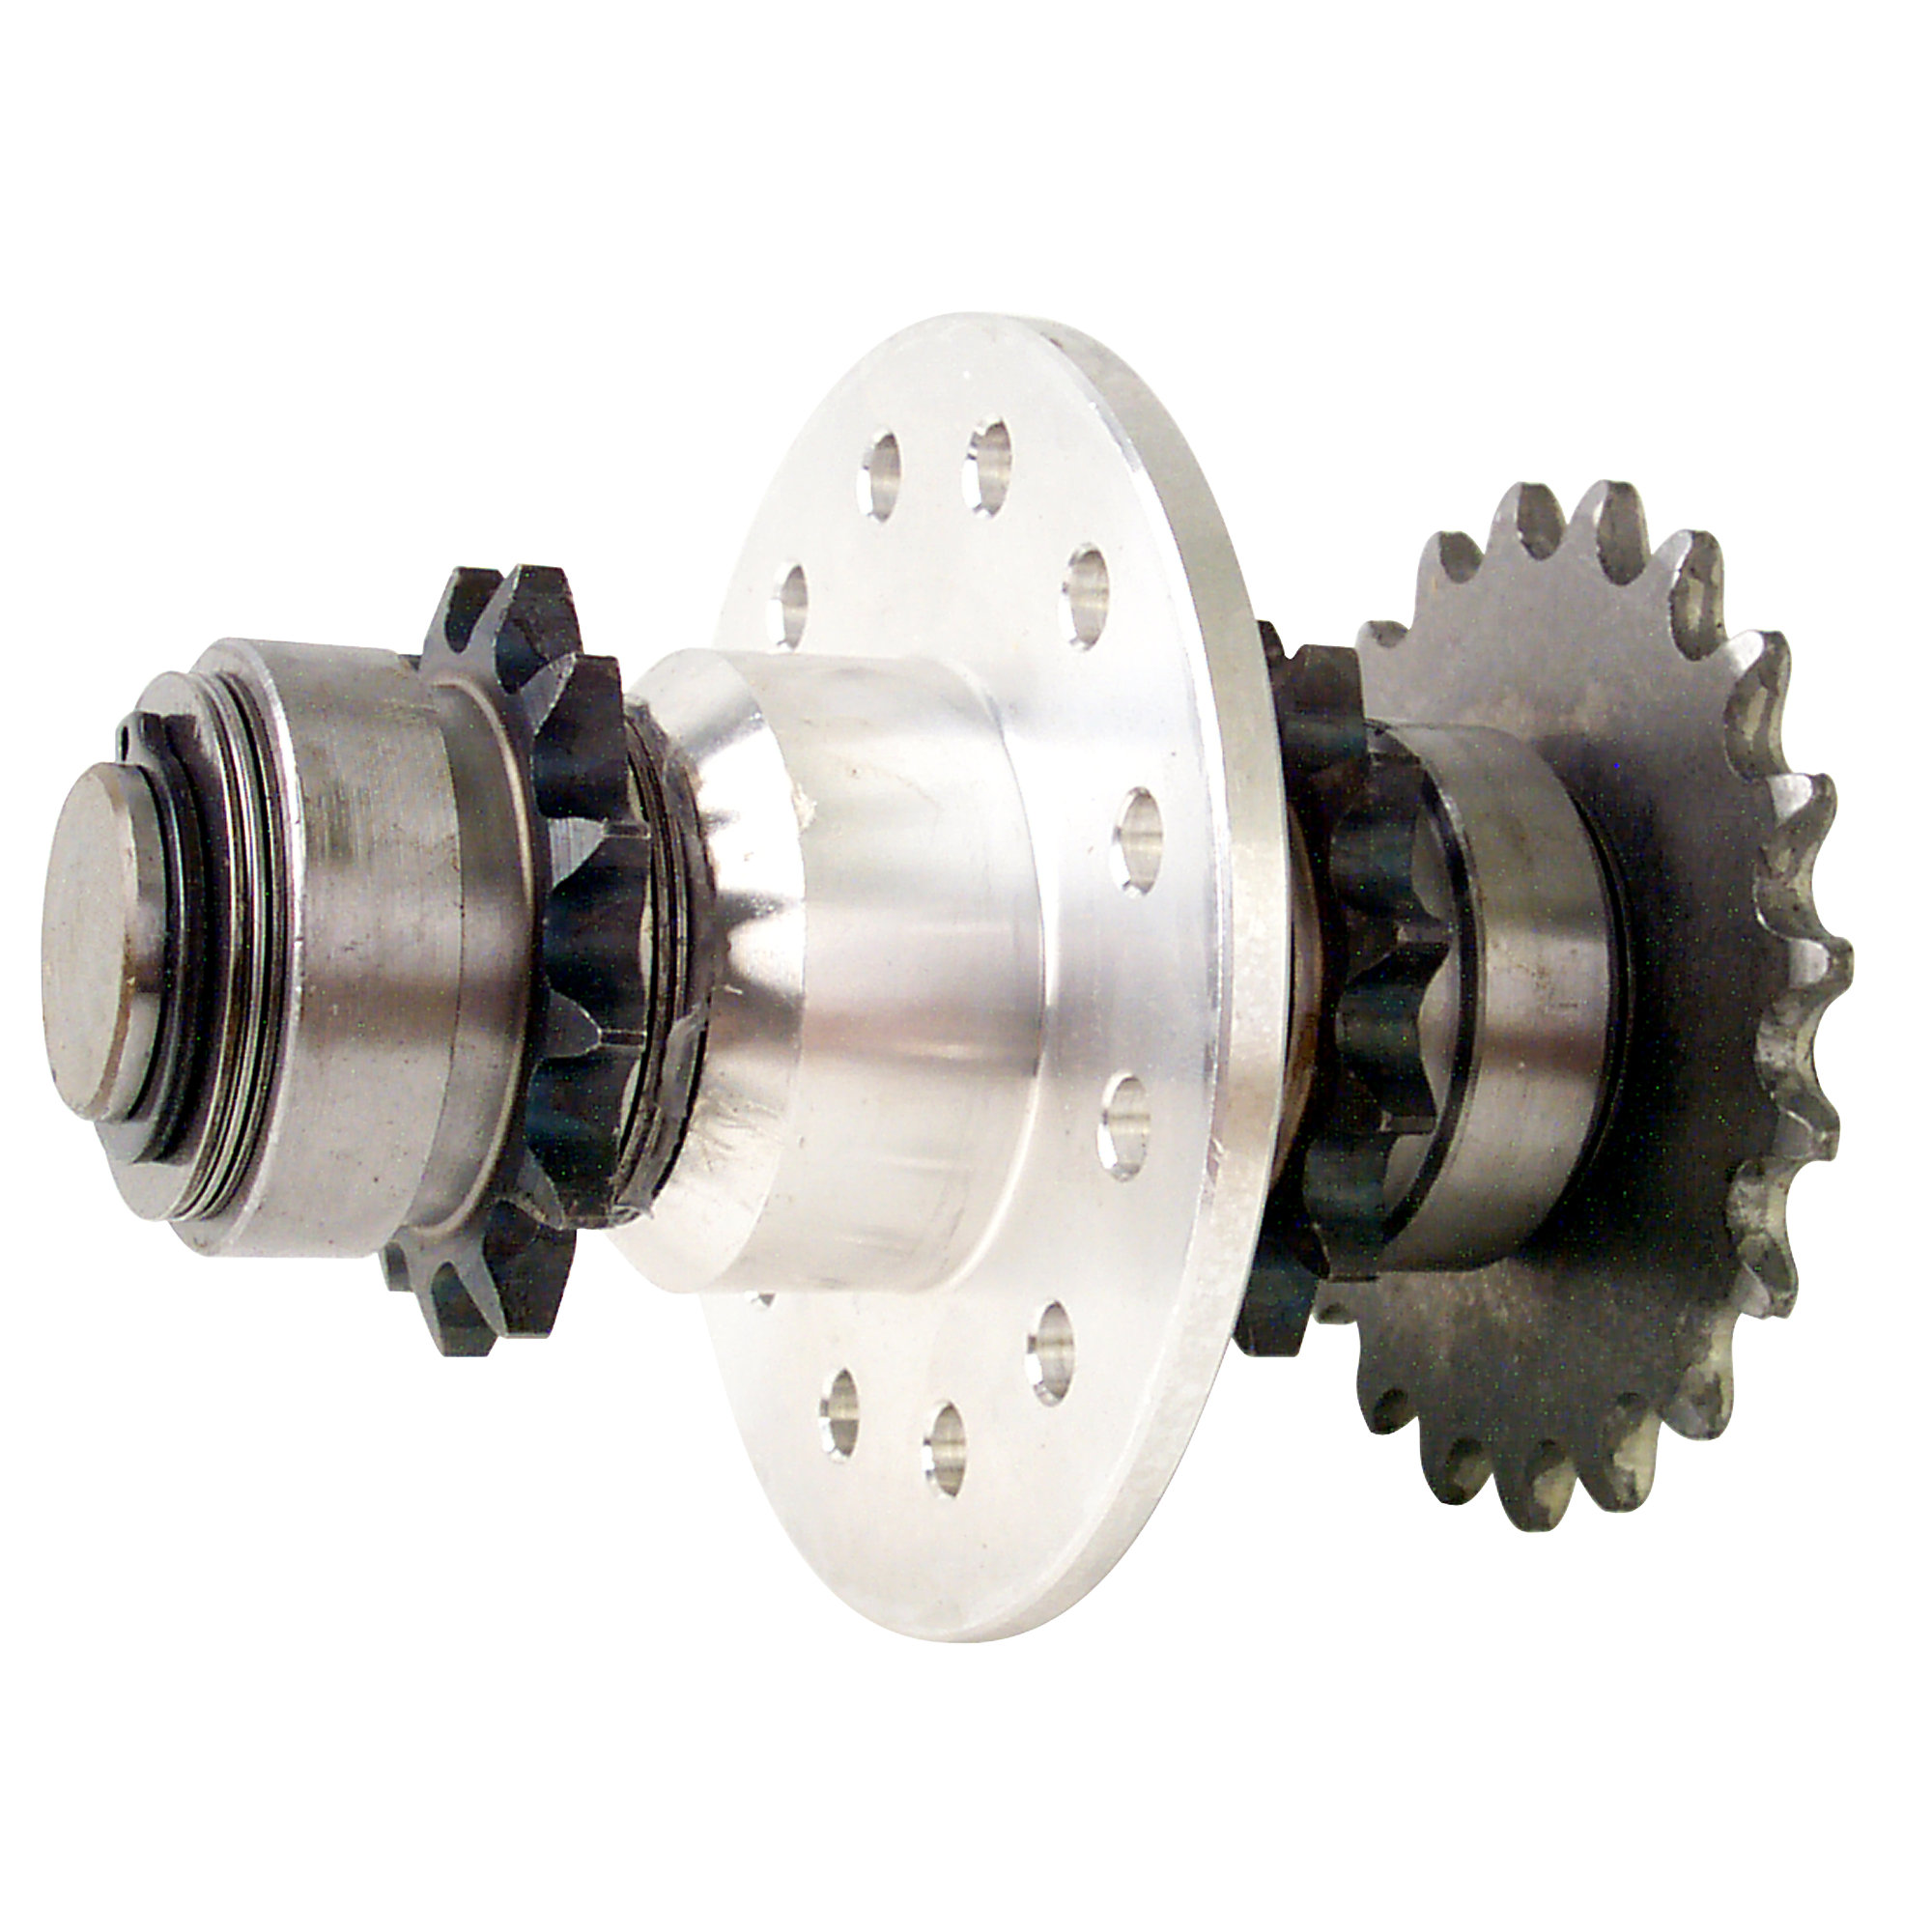 Hub Assembly For Stairmaster